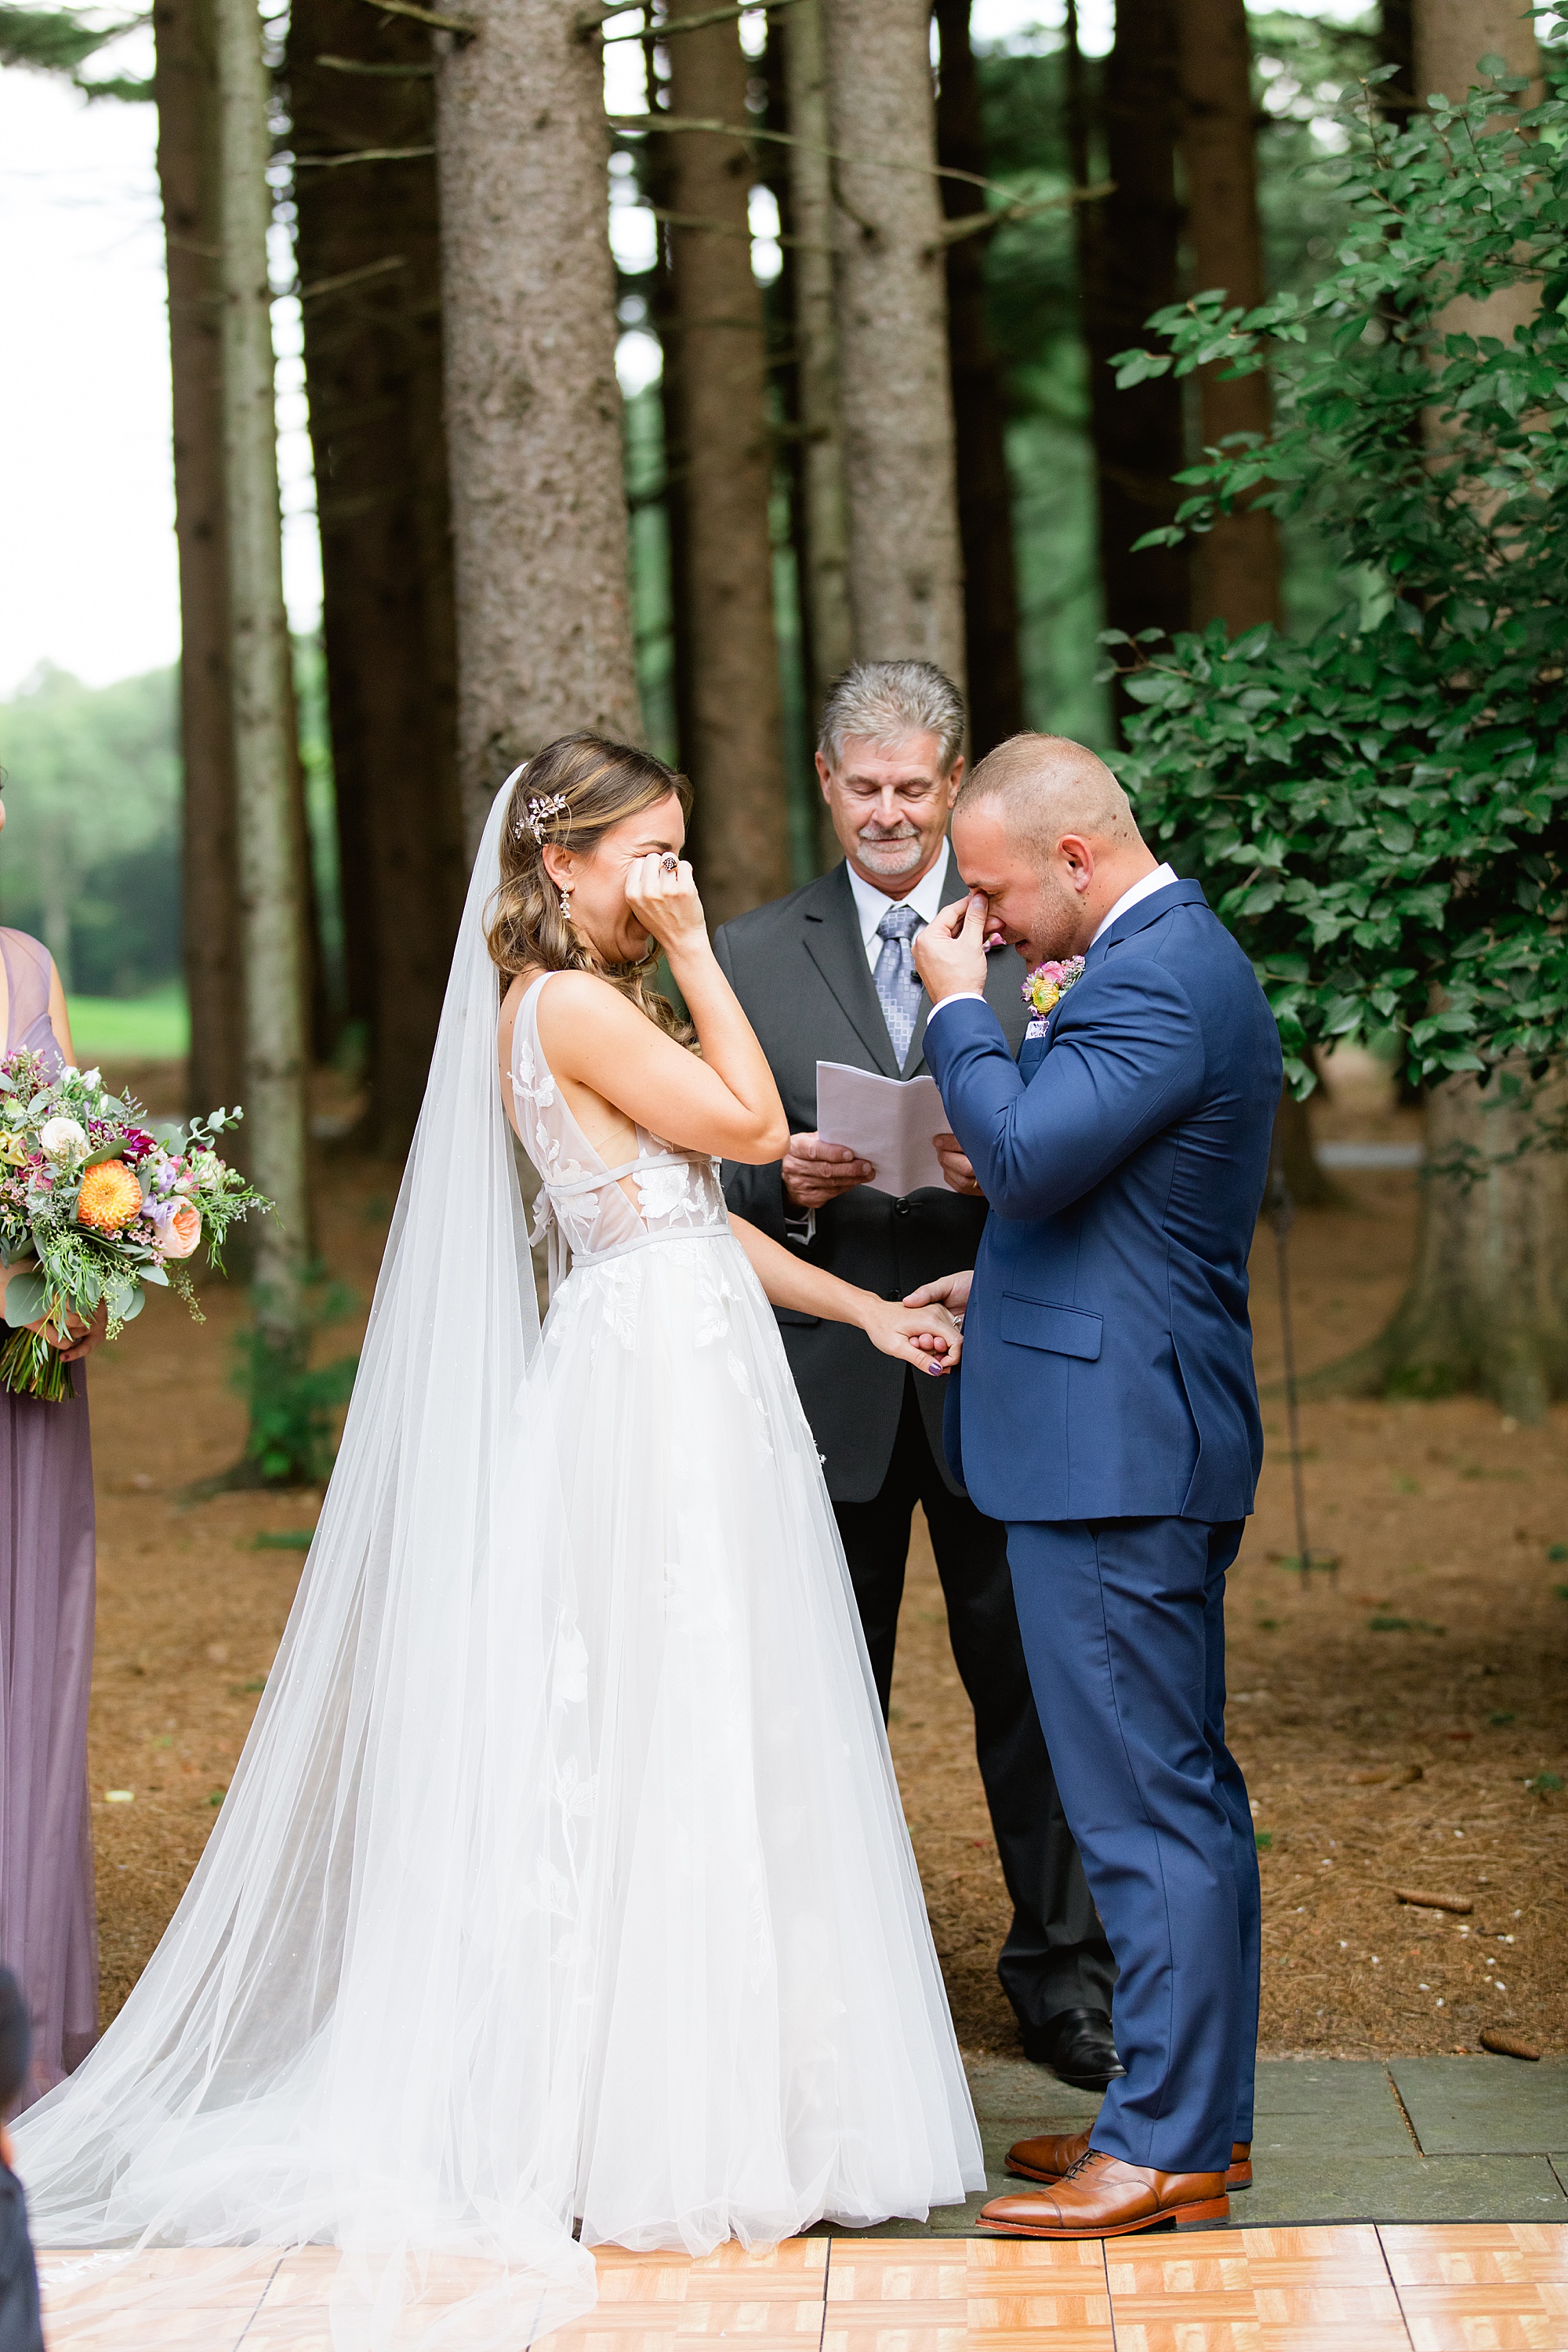 A romantic lavender, blush, and French blue late summer wedding at Shepherd’s Hollow Golf Club in Clarkston, Michigan by Breanne Rochelle Photography.